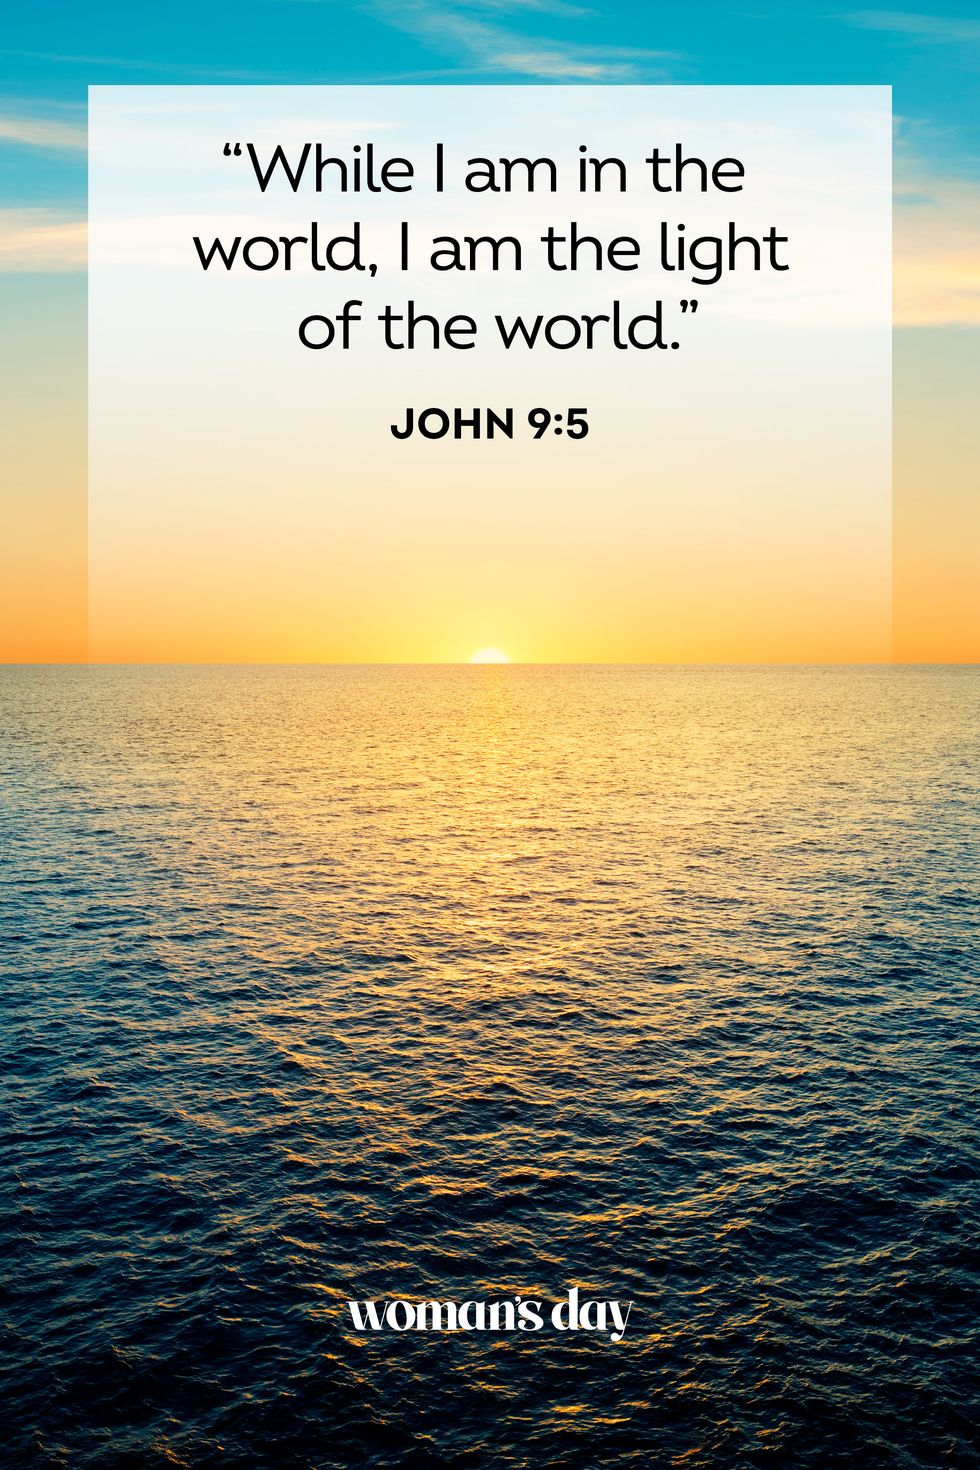 21 Bible About Light — Scripture about Light in Darkness